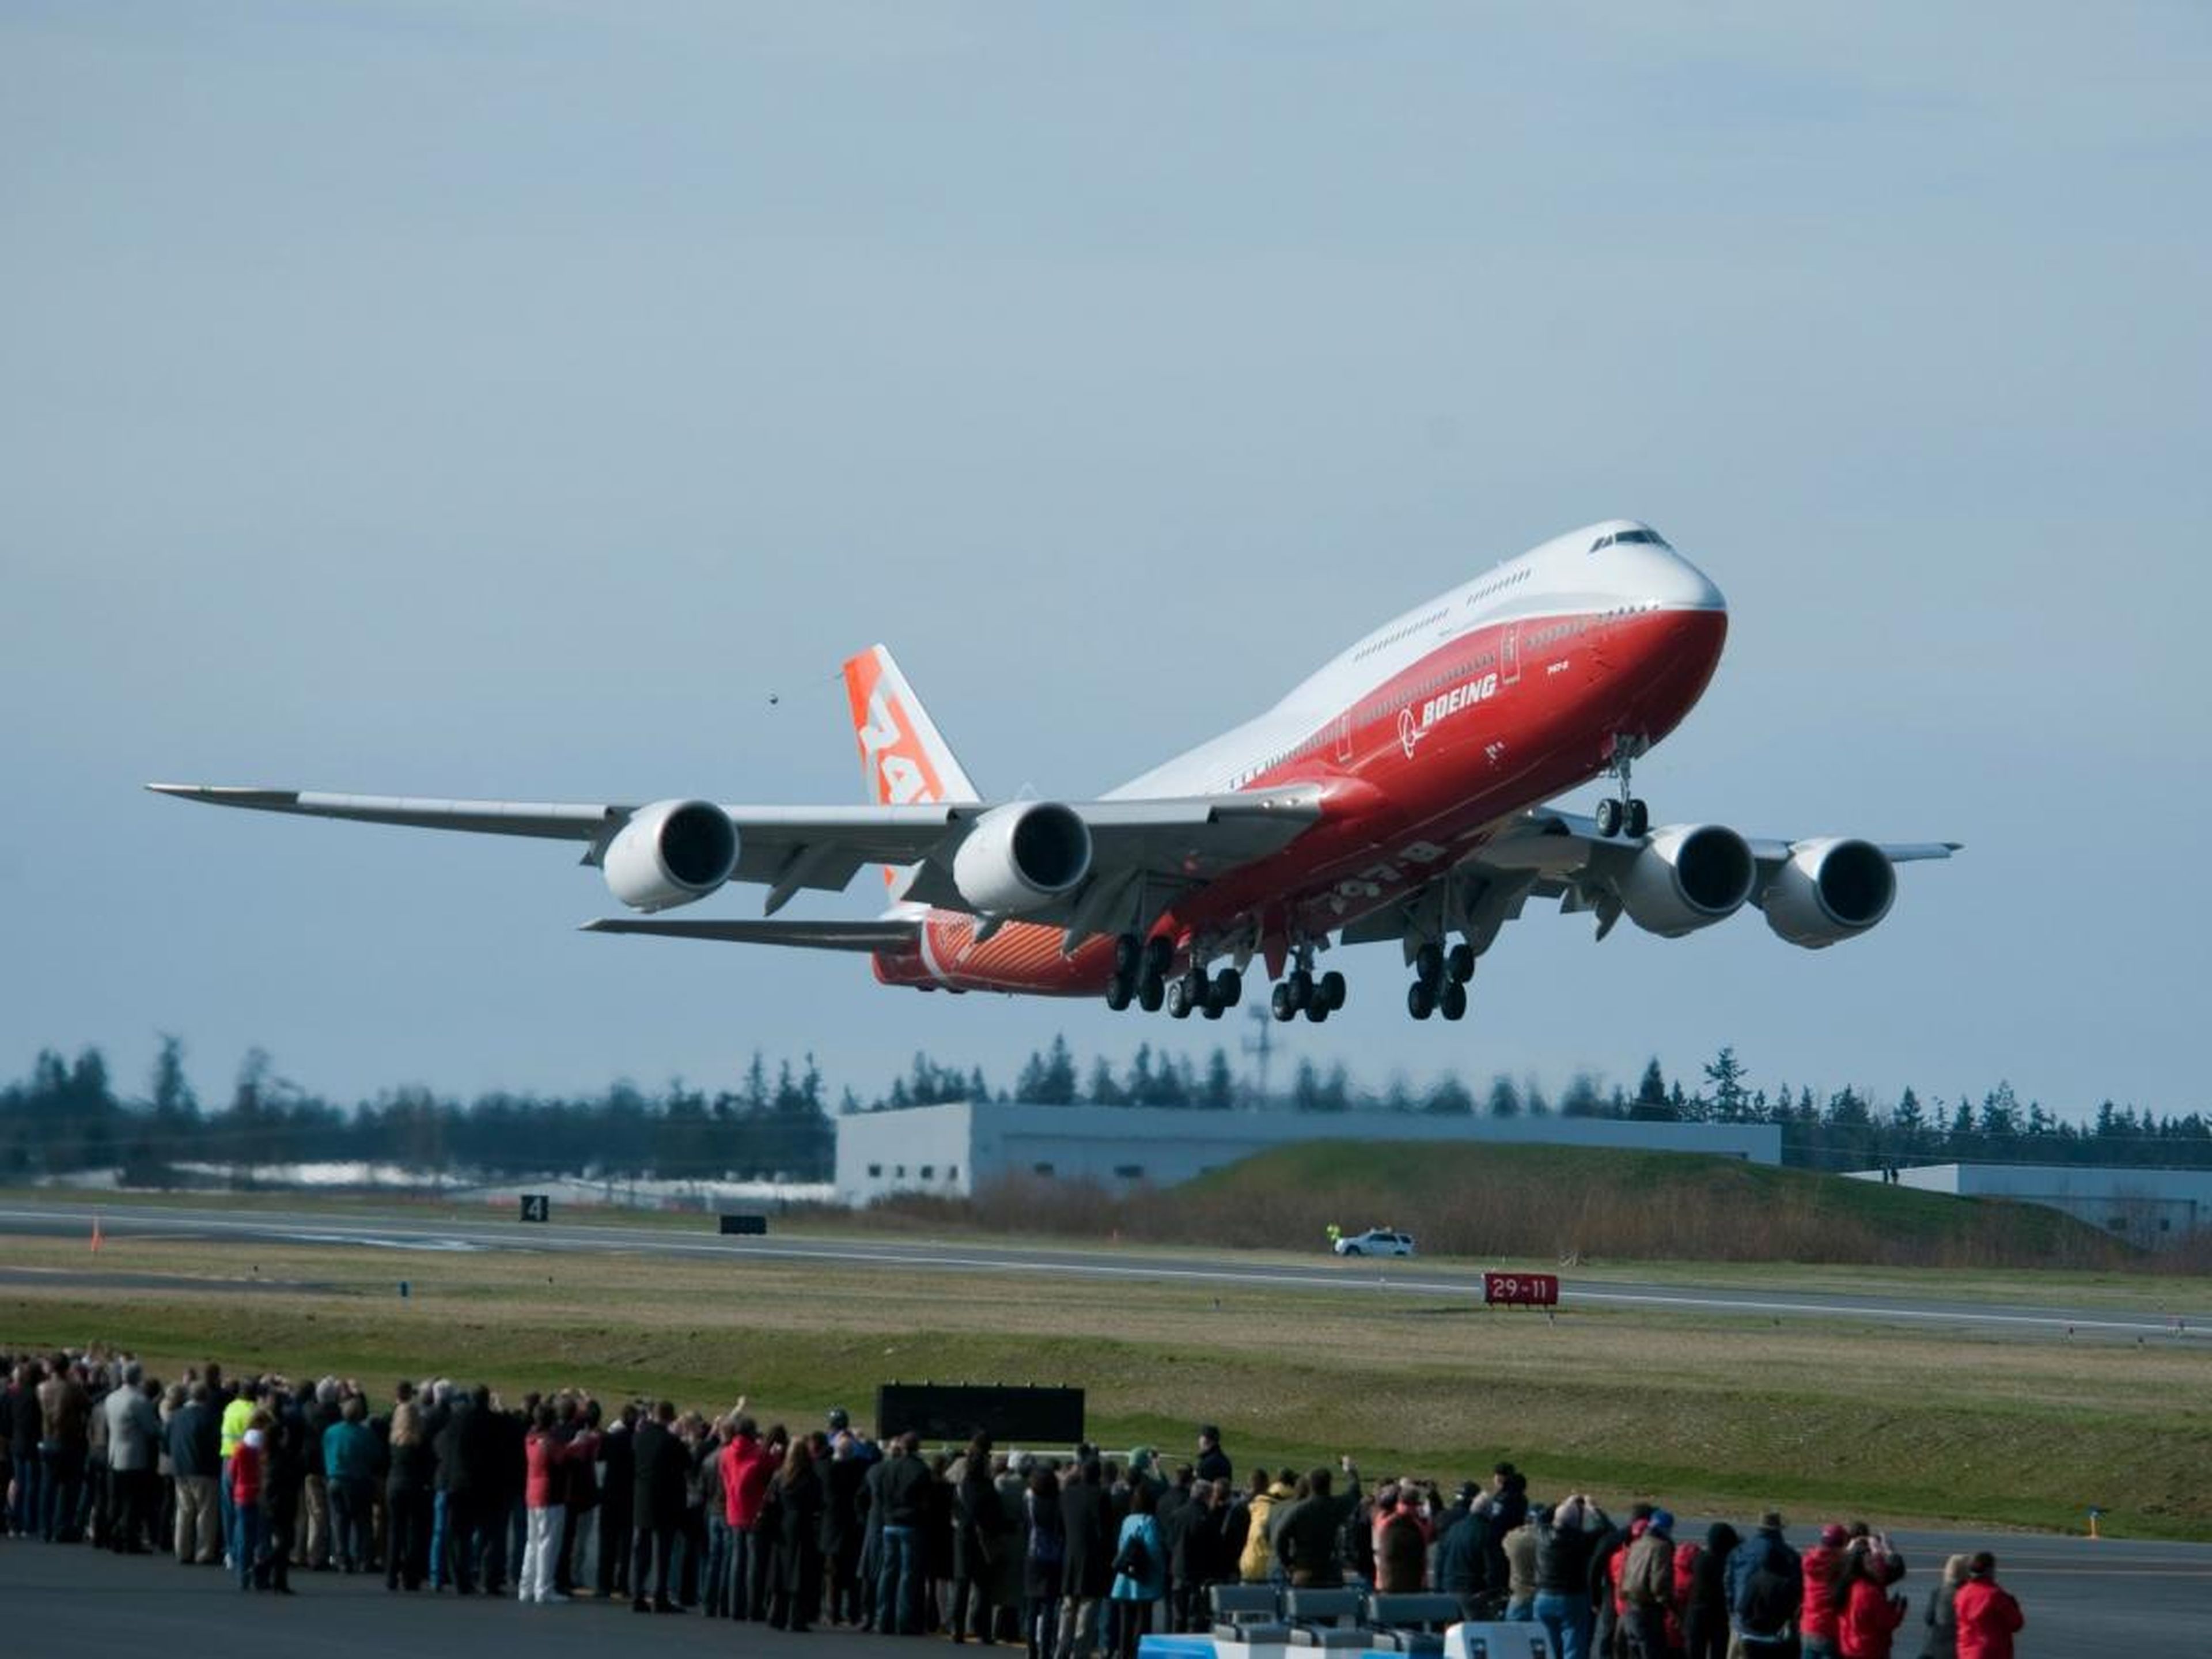 Boeing has similarly all but given up on the 747-8 as a passenger jet. Only the freighter version remains in production, at a rate of just one plane every two months.